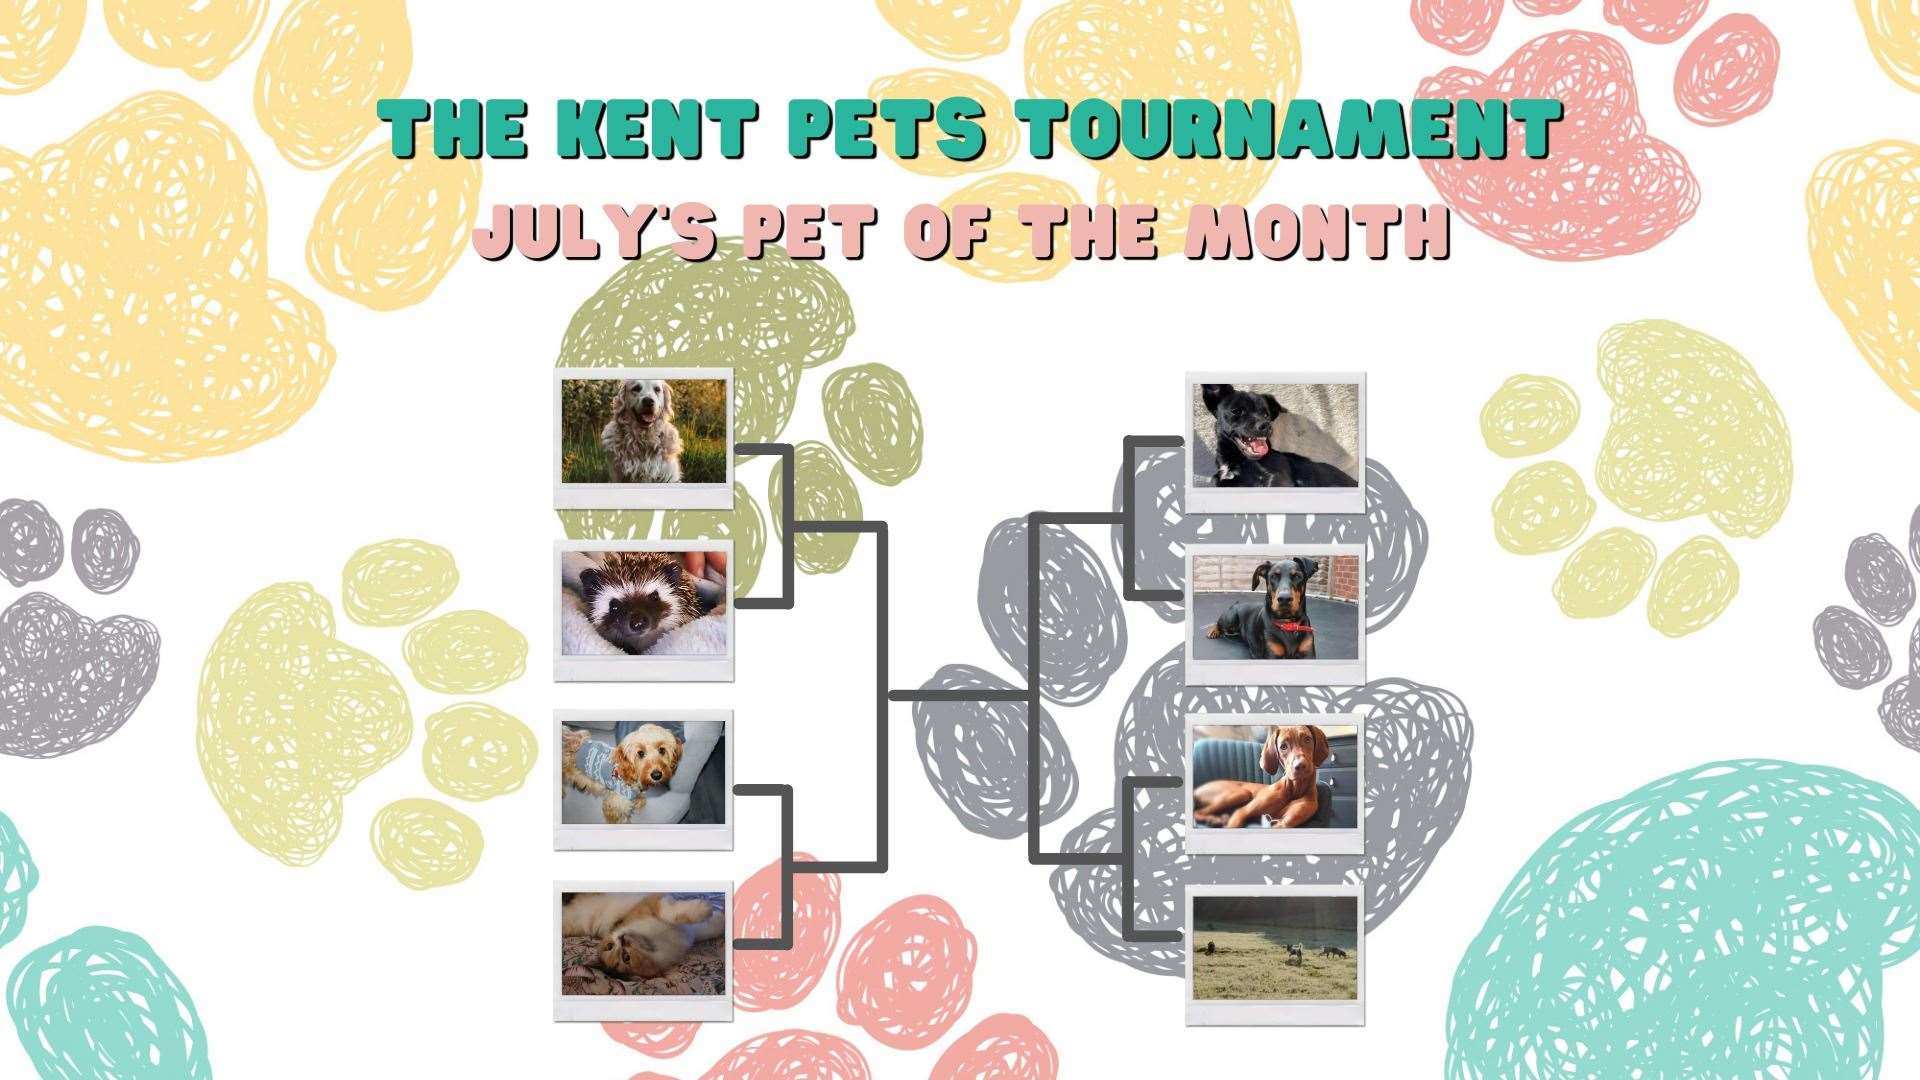 Vote in the first round of July's Kent Pet Tournament